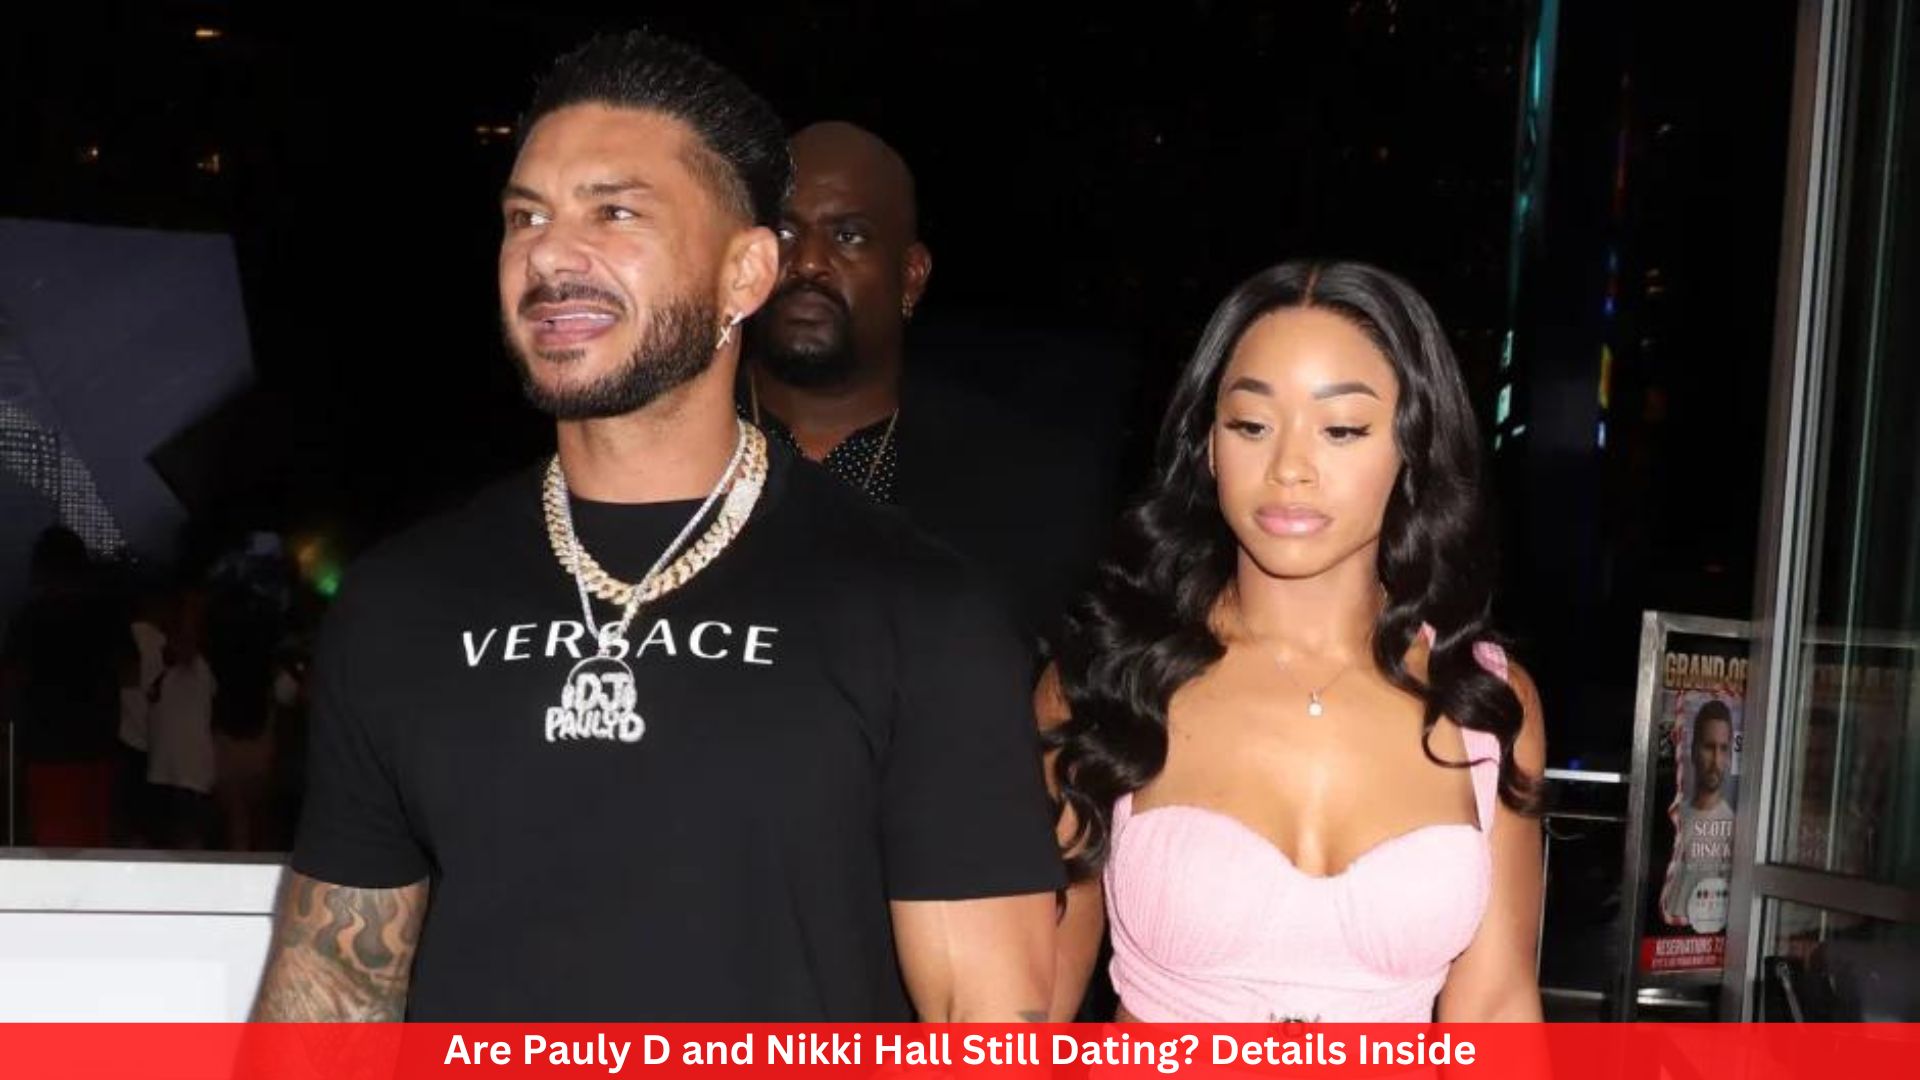 Are Pauly D and Nikki Hall Still Dating? Details Inside